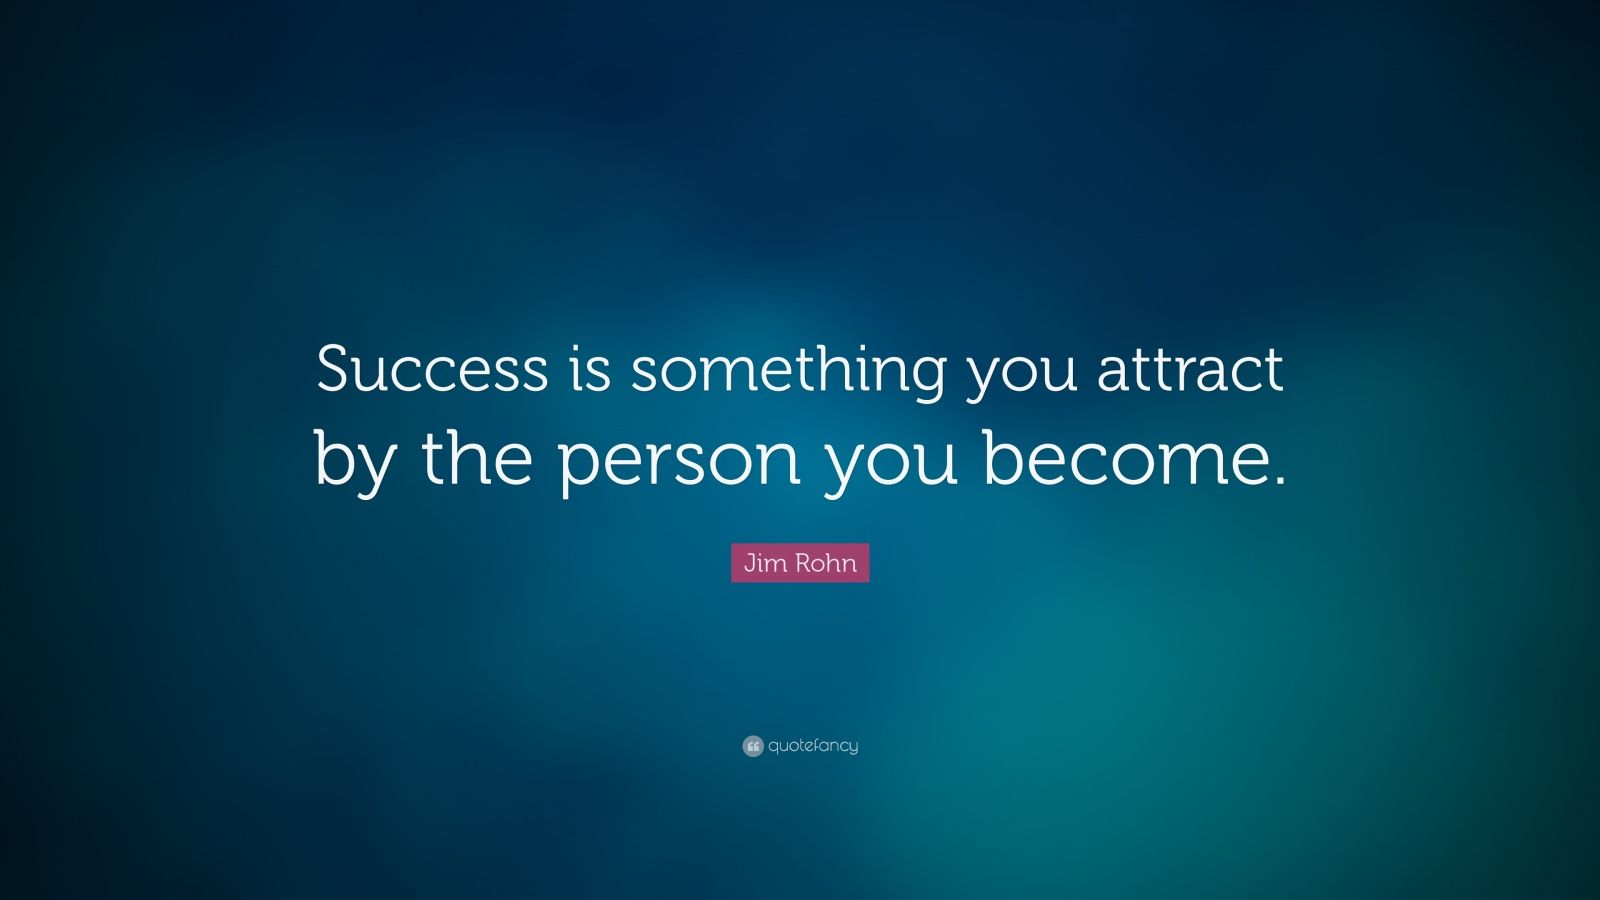 Jim Rohn Quote: “Success is something you attract by the person you ...